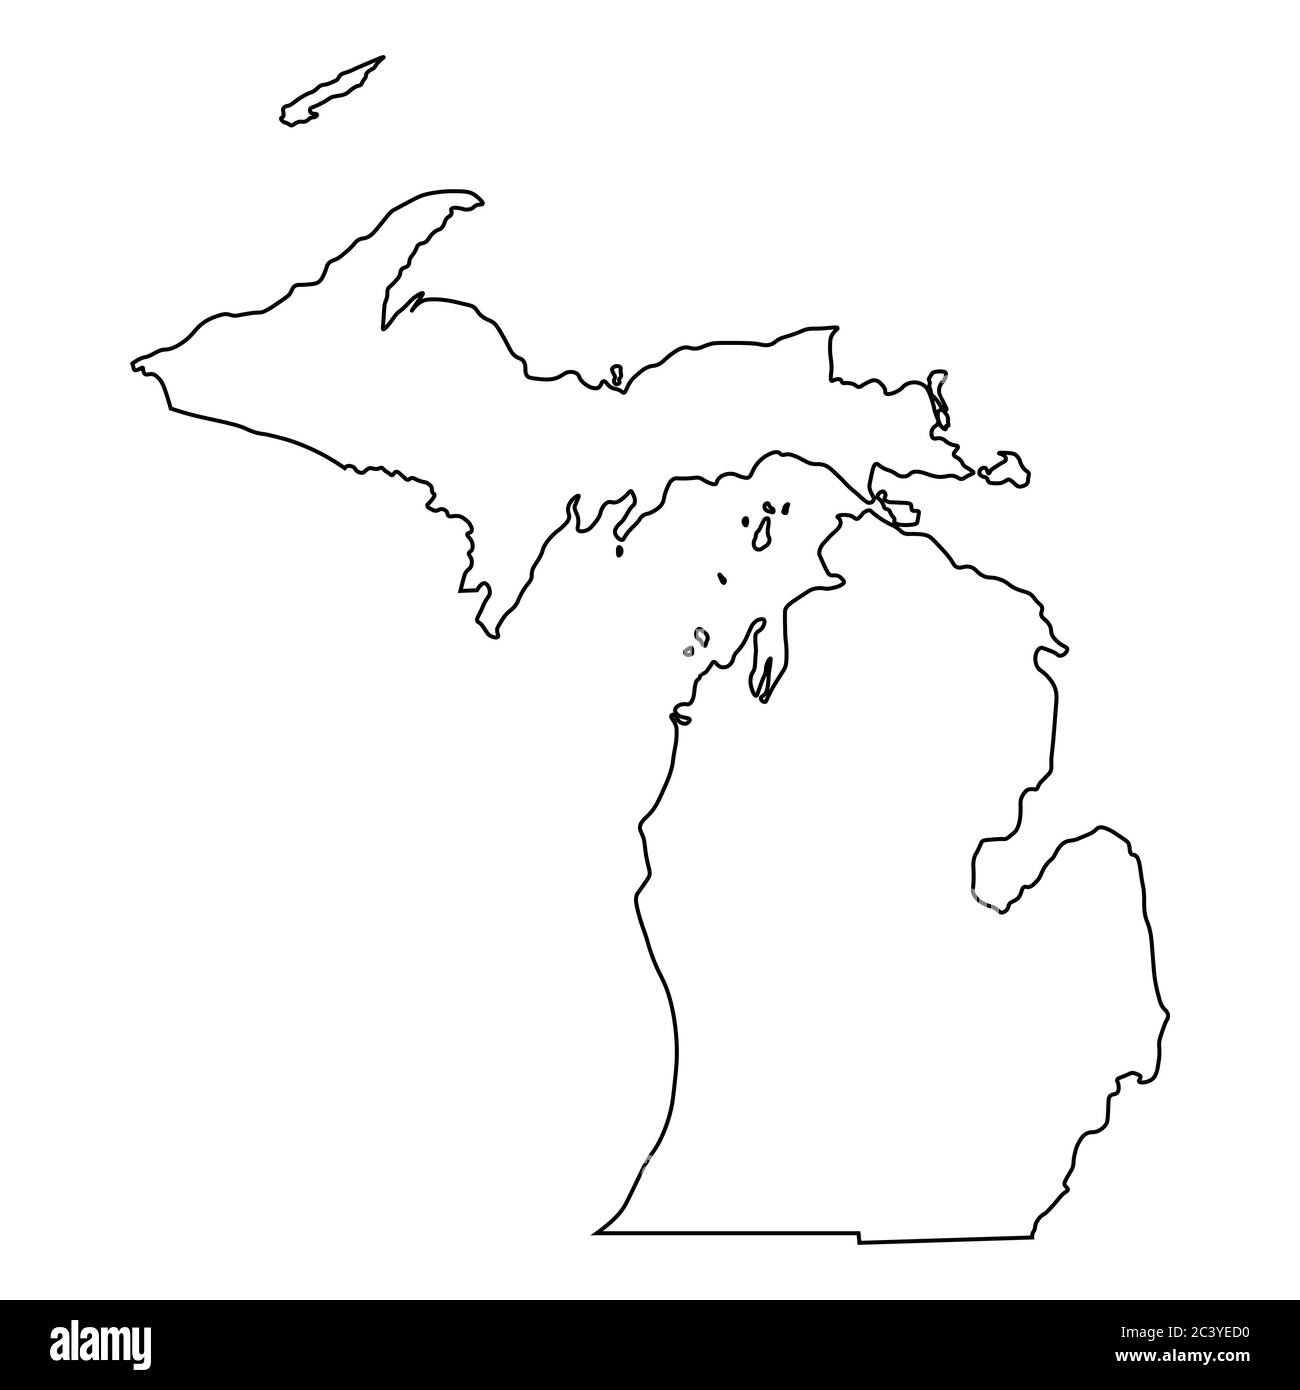 Michigan MI state Maps. Black outline map isolated on a white background. EPS Vector Stock Vector